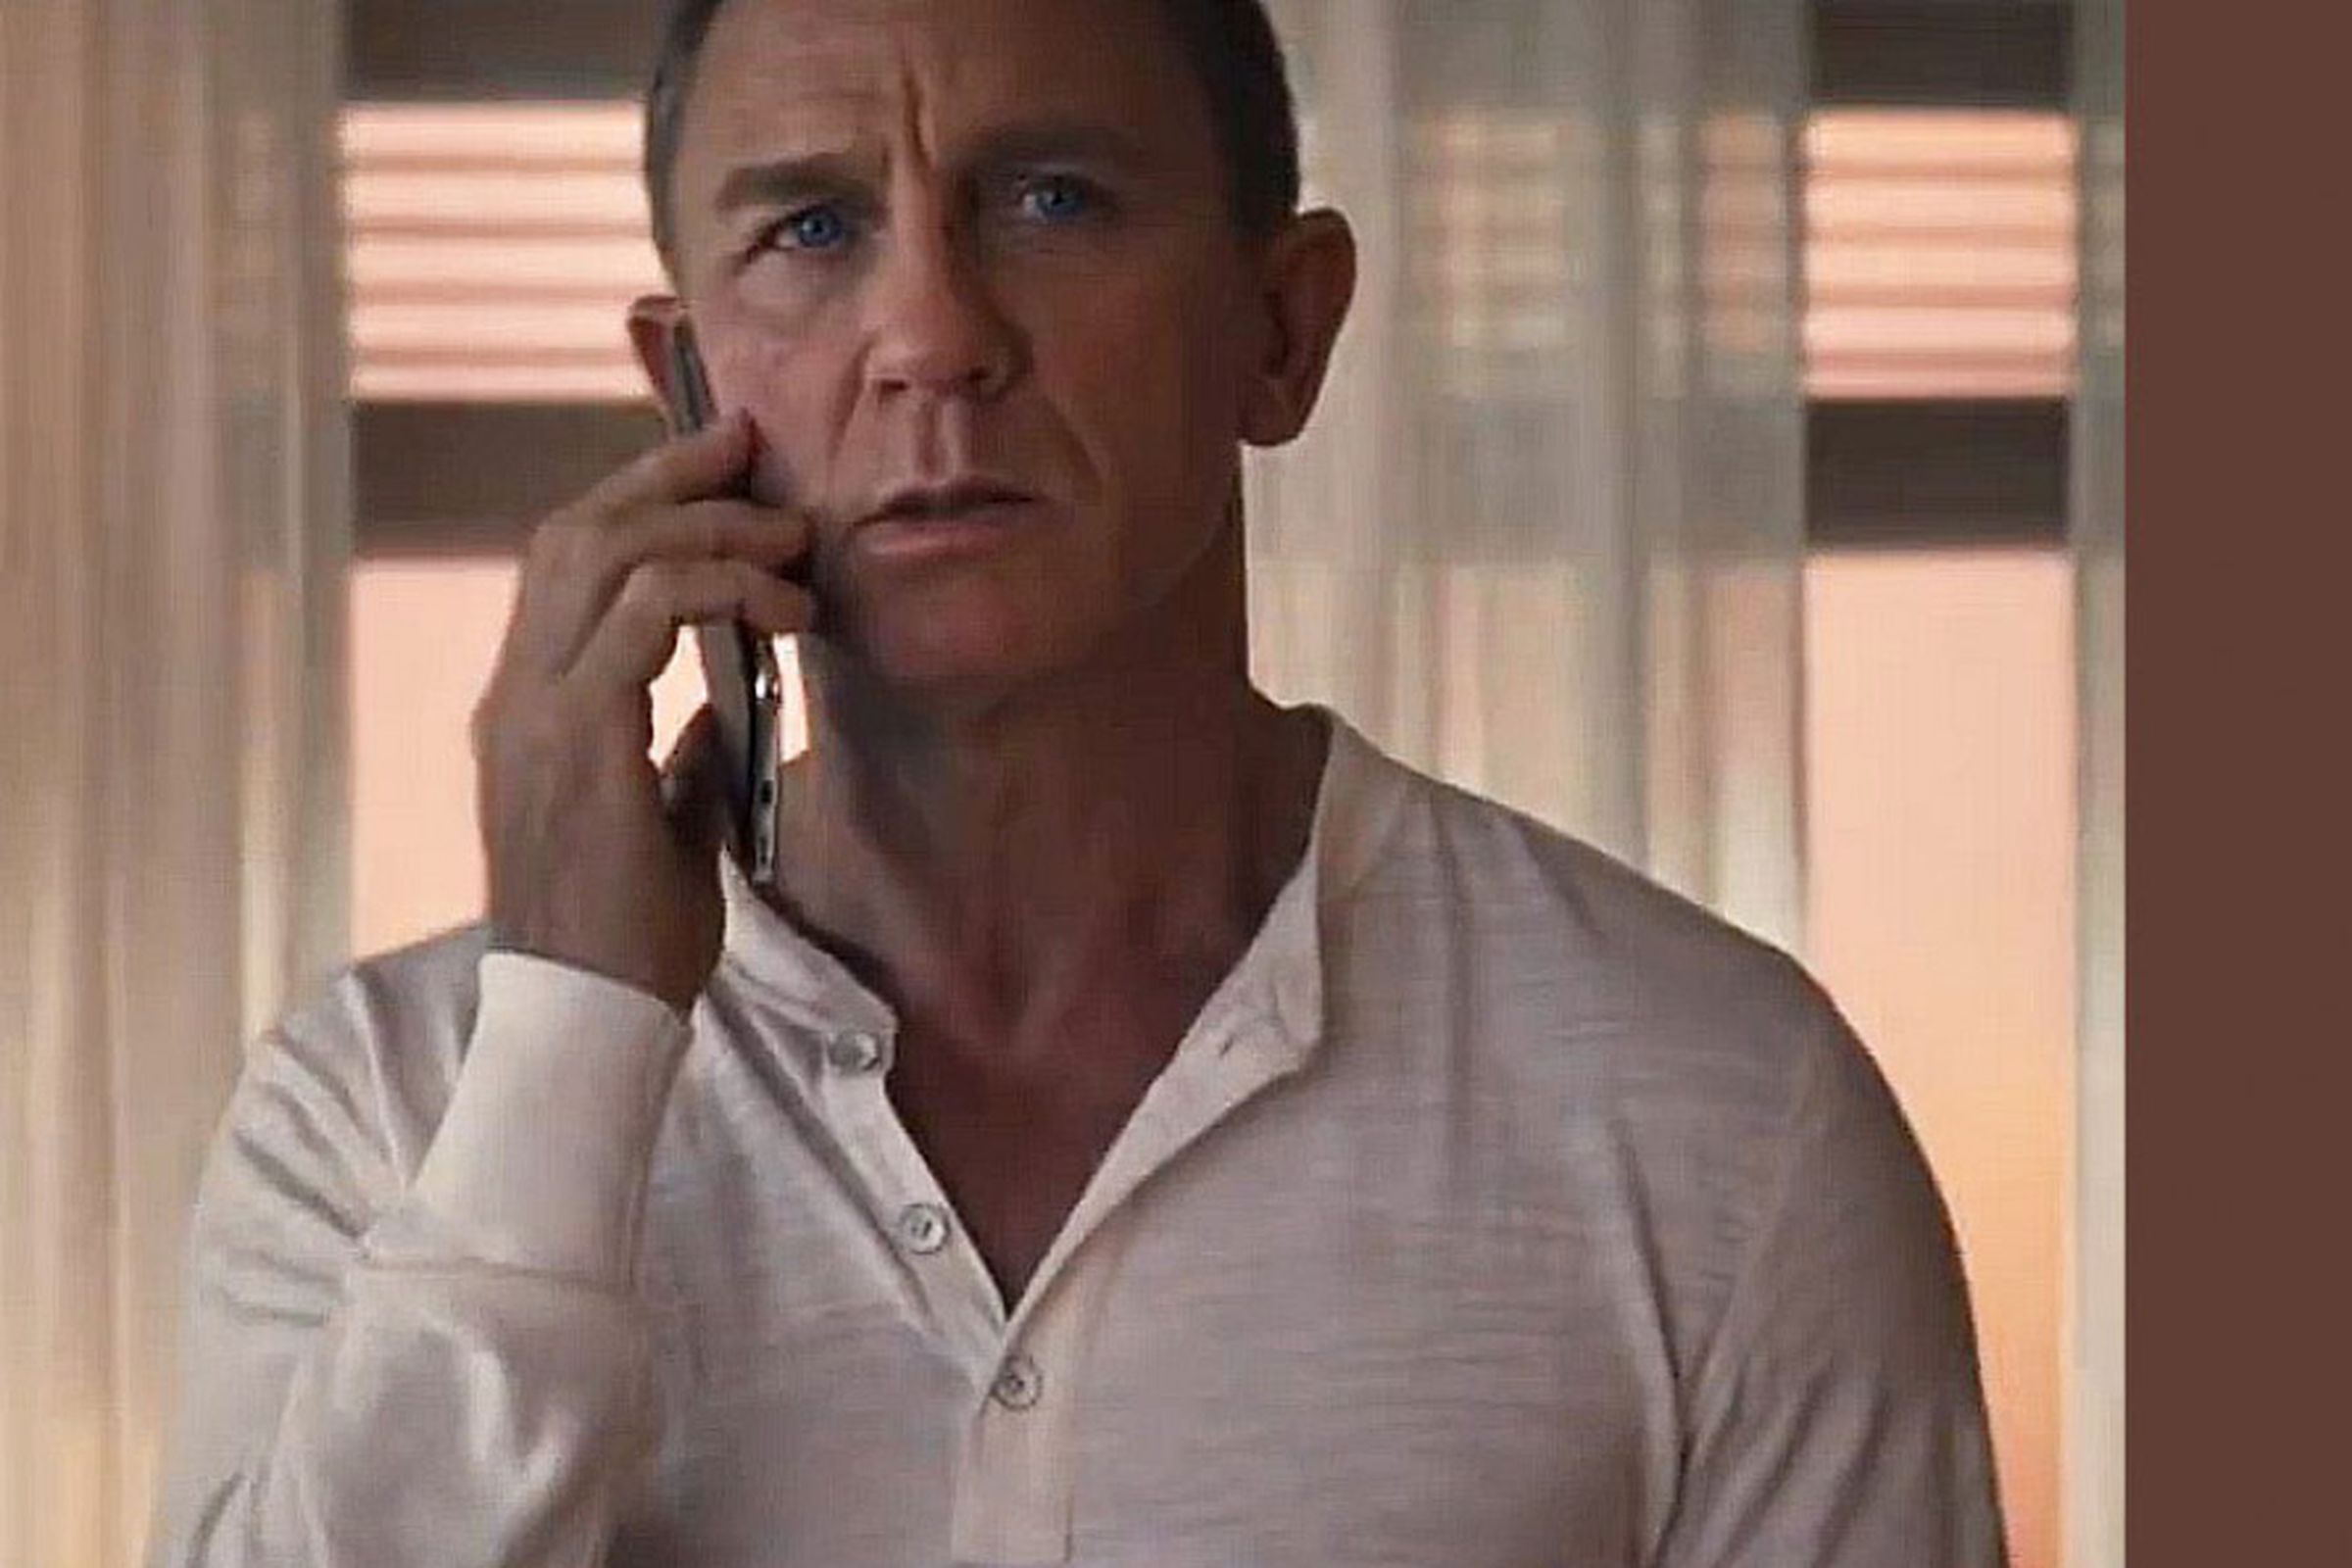 A promotional image featuring Daniel Craig using an HMD device.